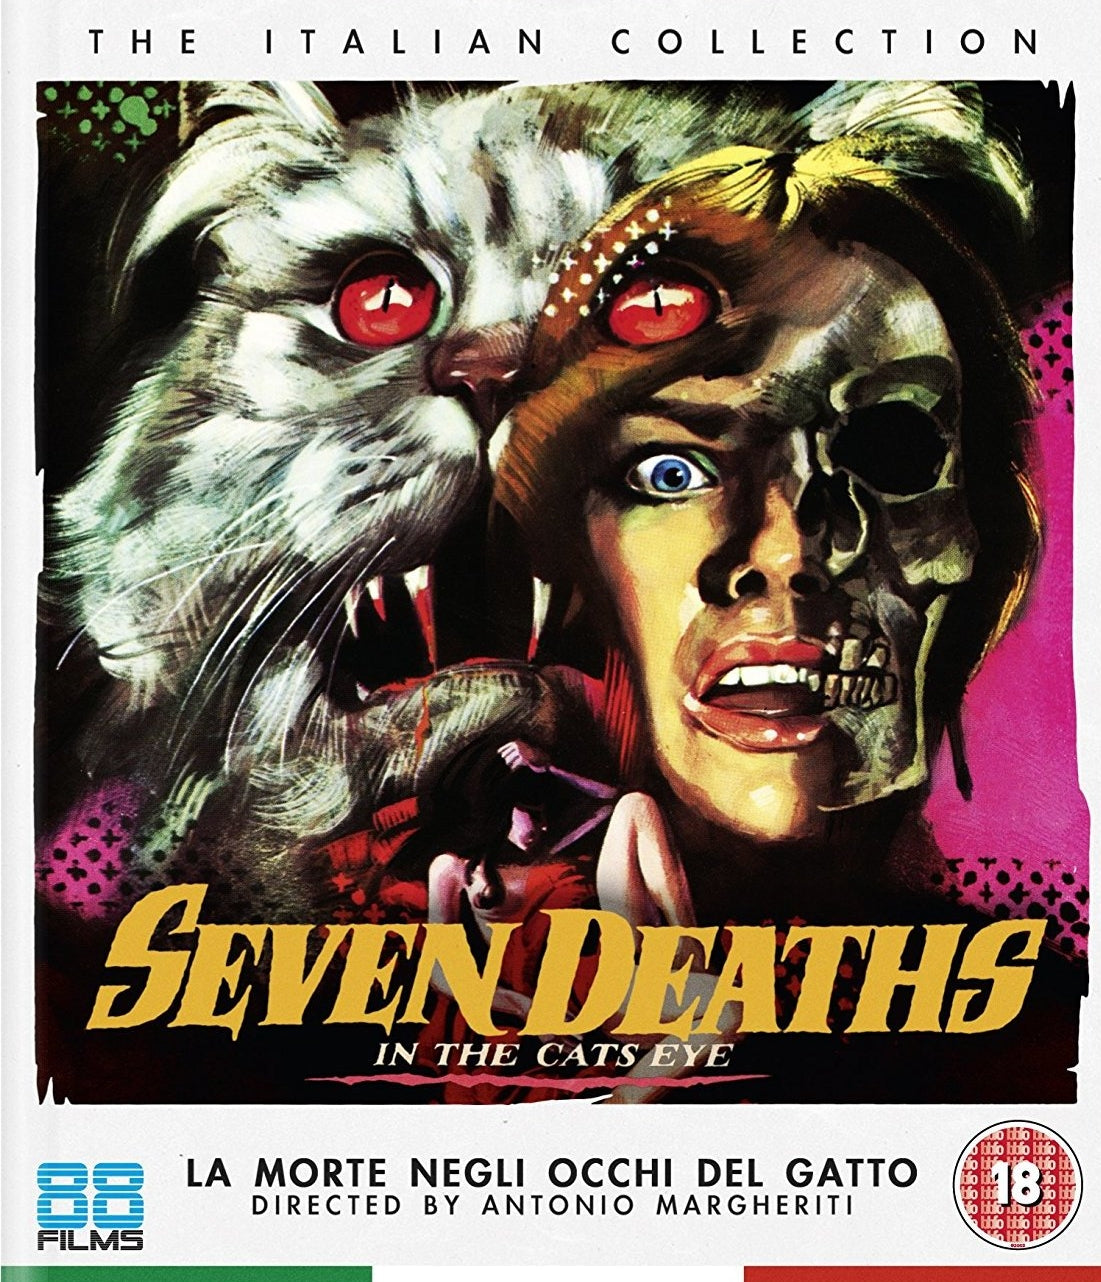 Seven Deaths In The Cats Eye (Region Free Import) Blu-Ray Blu-Ray